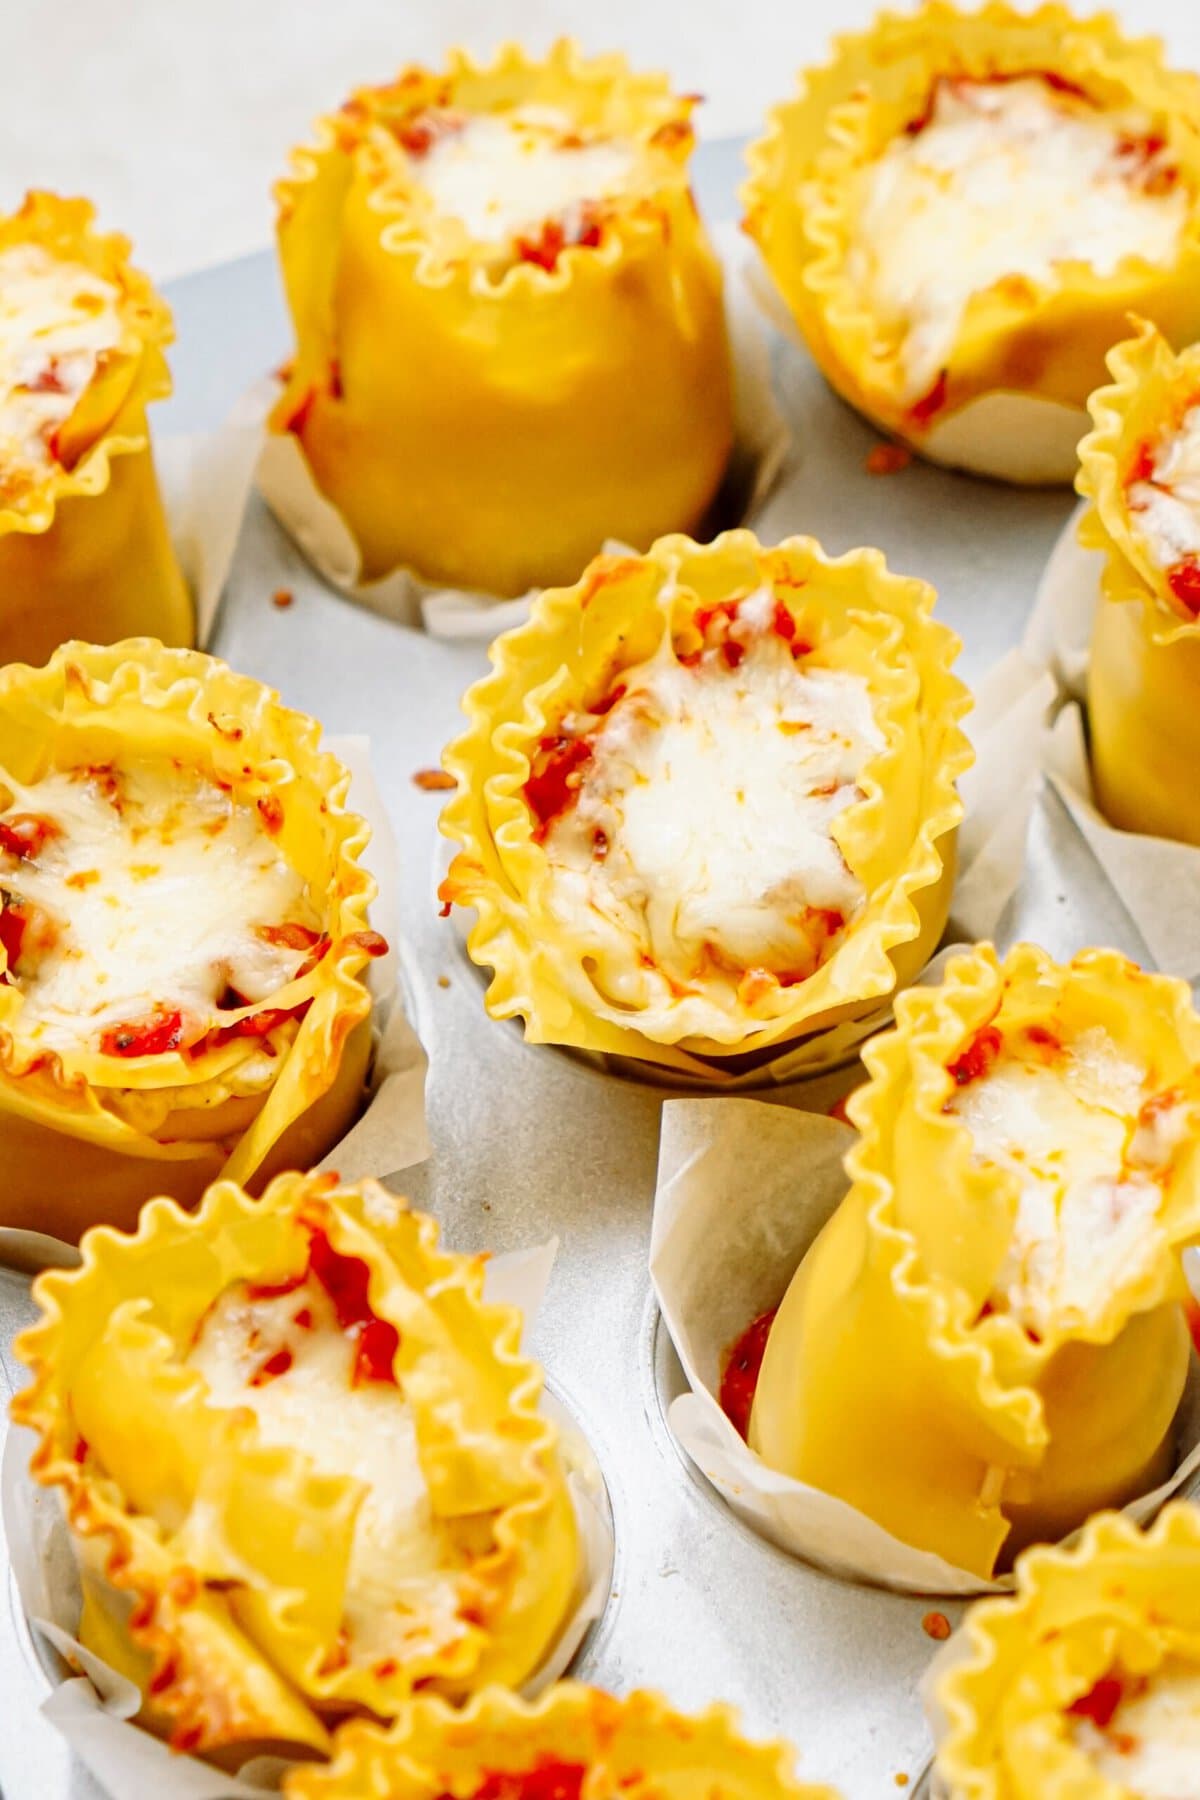 A close-up of lasagna cups filled with cheese and tomato sauce, topped with melted cheese, and arranged in paper liners.